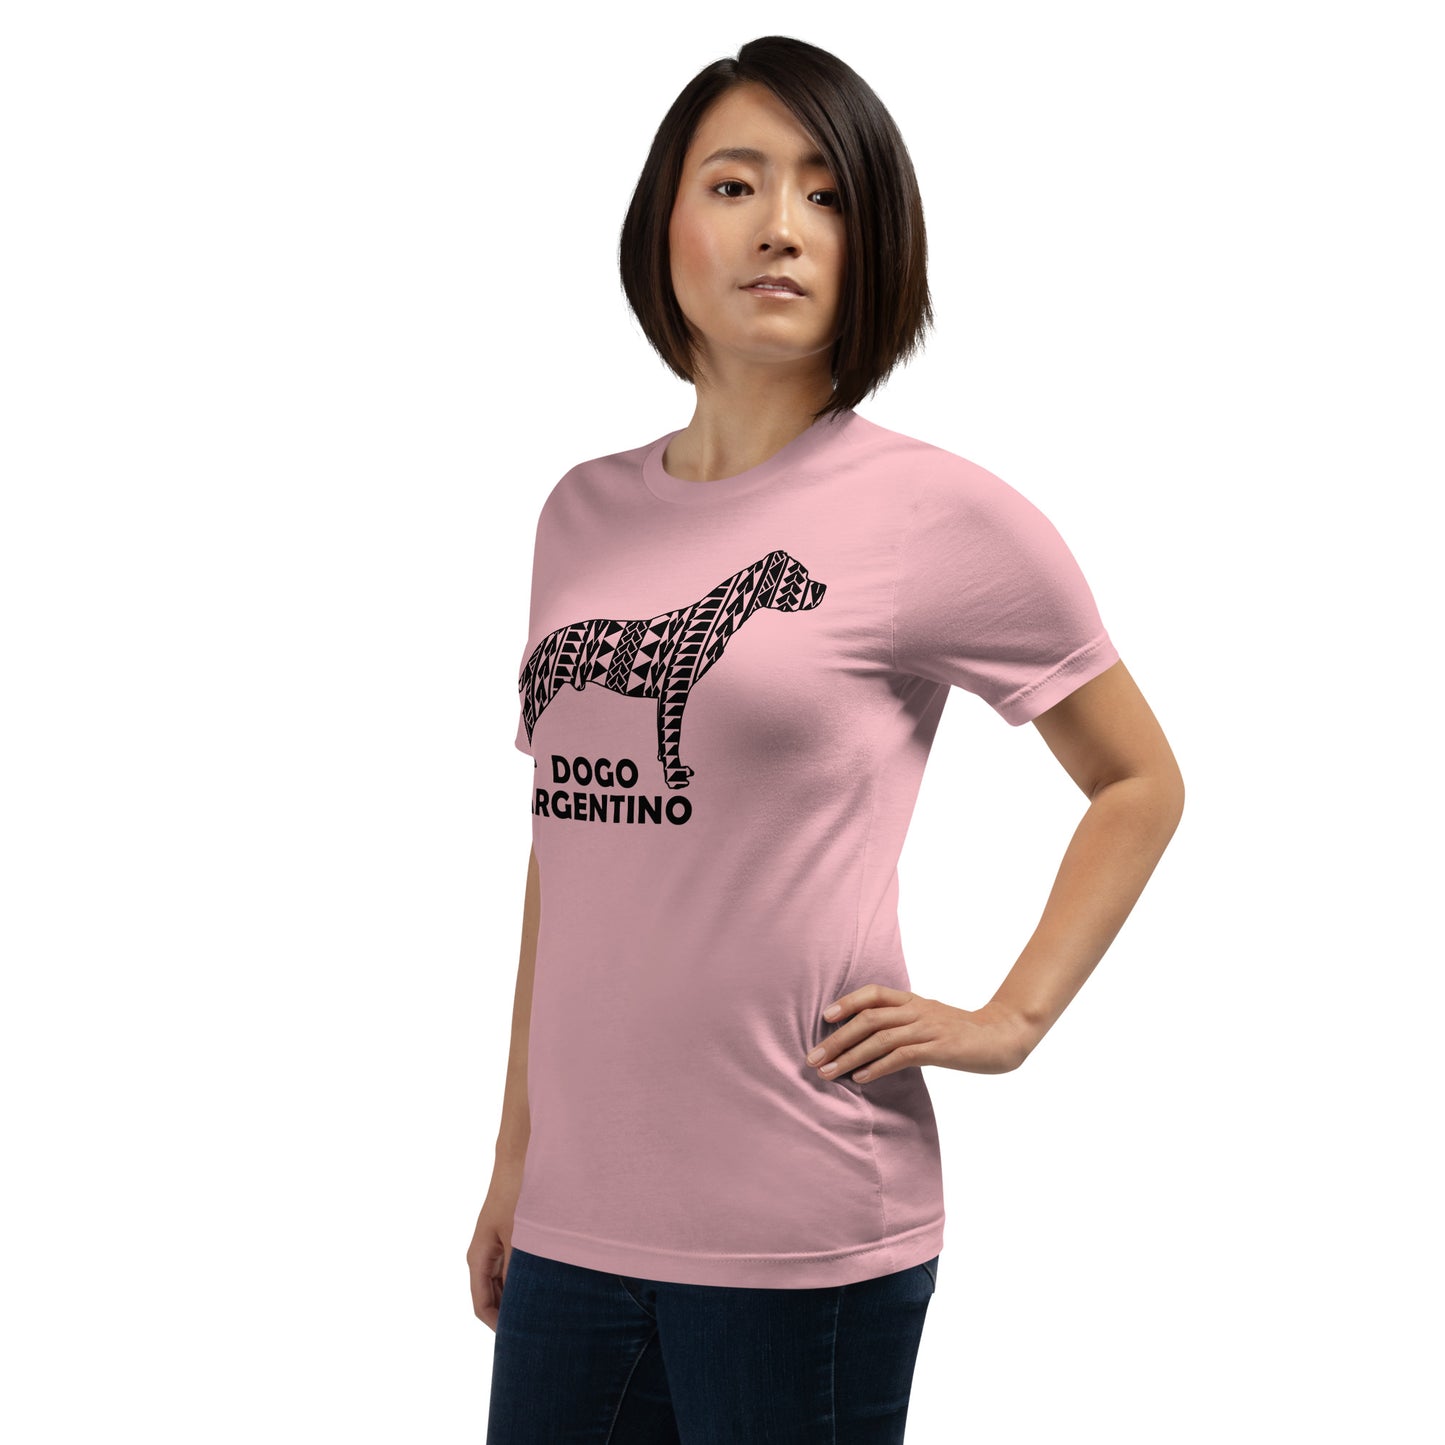 Dogo Argentino Polynesian t-shirt pink by Dog Artistry.